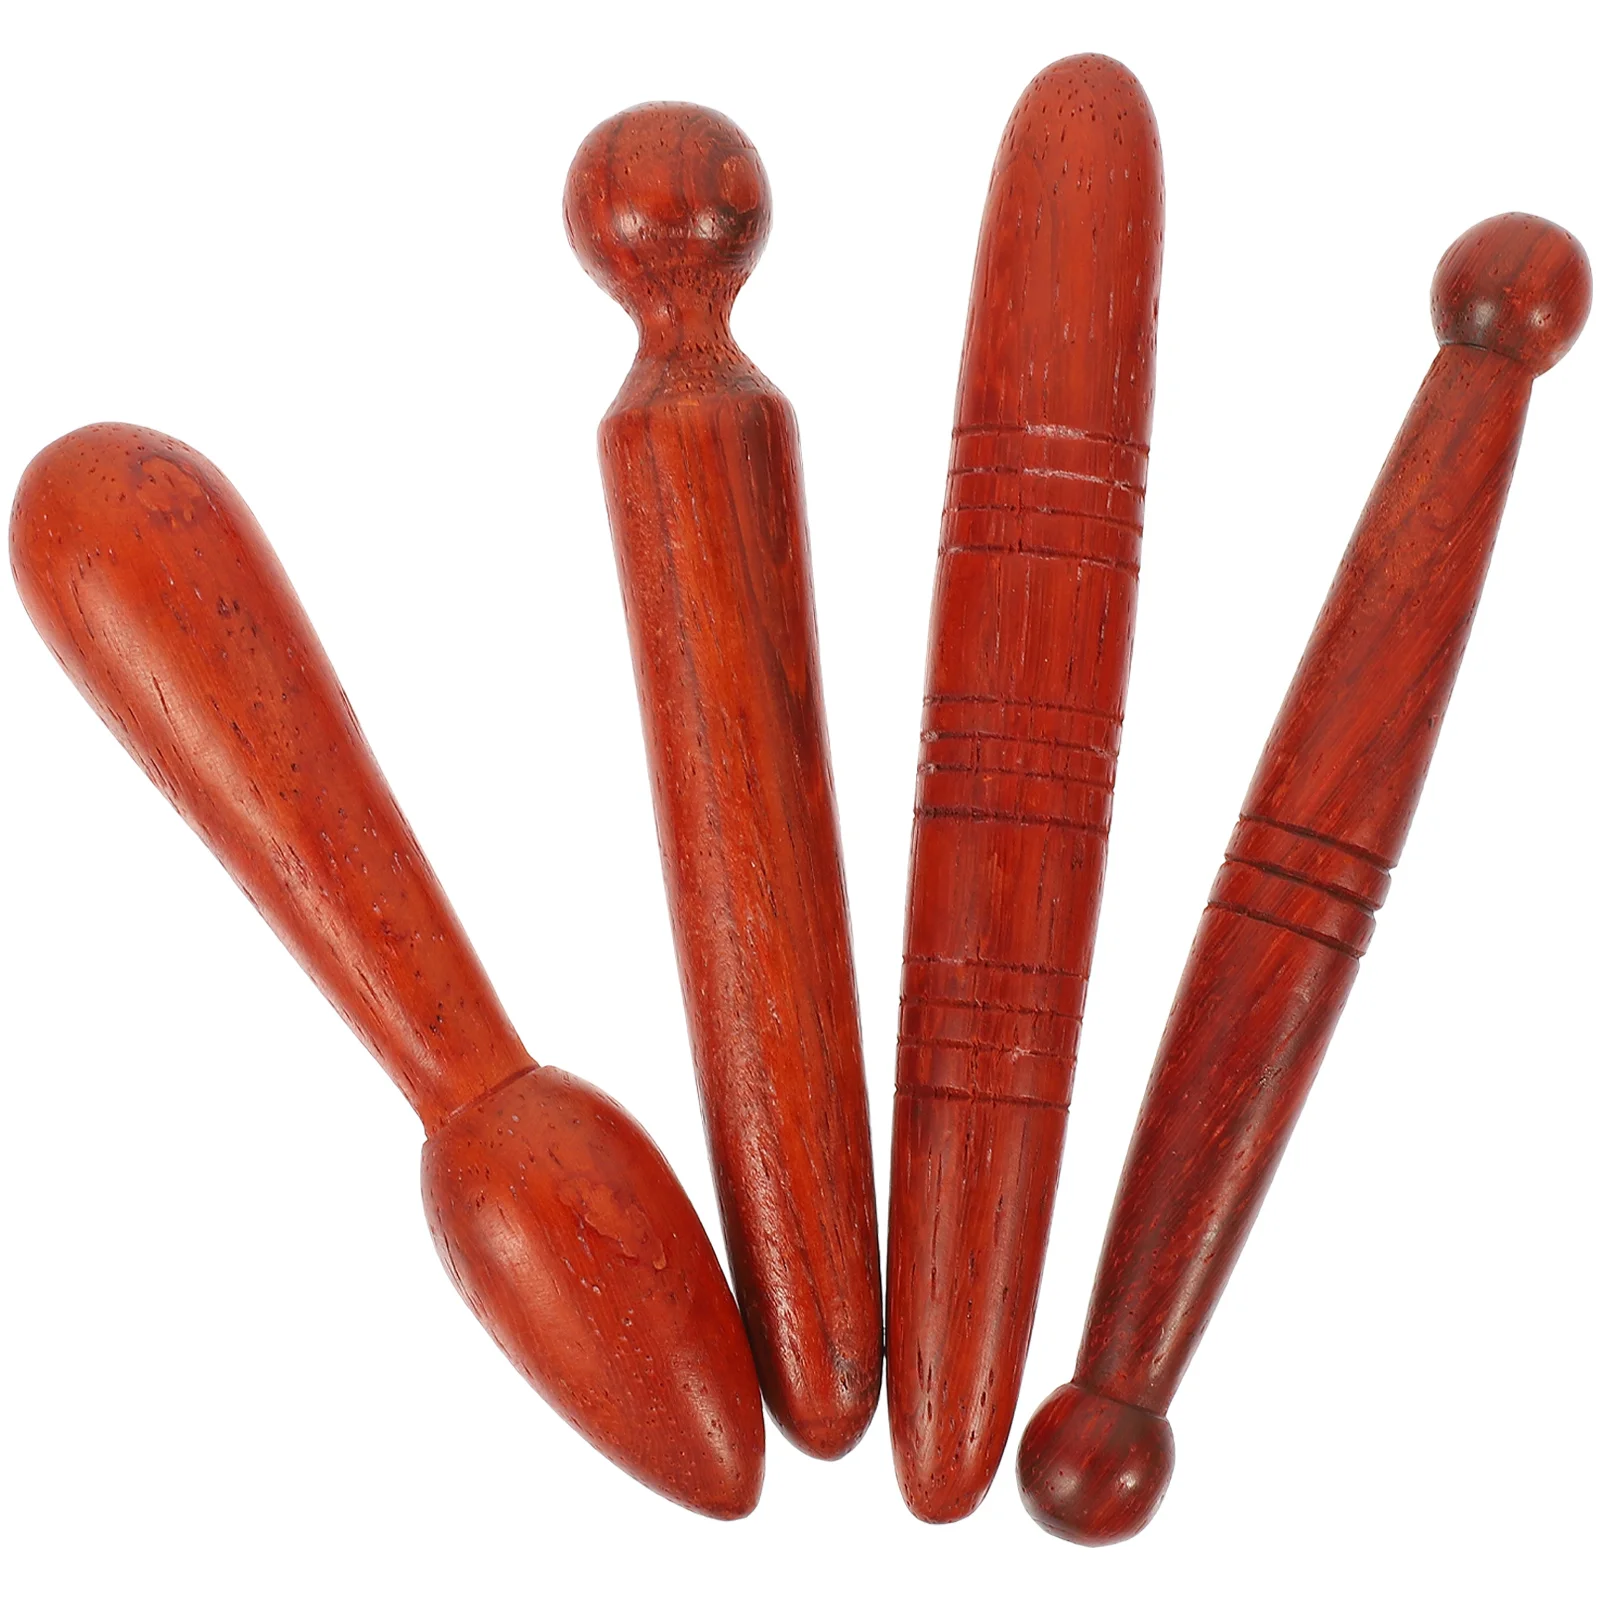 

4 Pcs Acupuncture Stick Foot Massagers Feet Wood Manual Sticks Wooden Care Women Roller Thai Tools Pressure Point